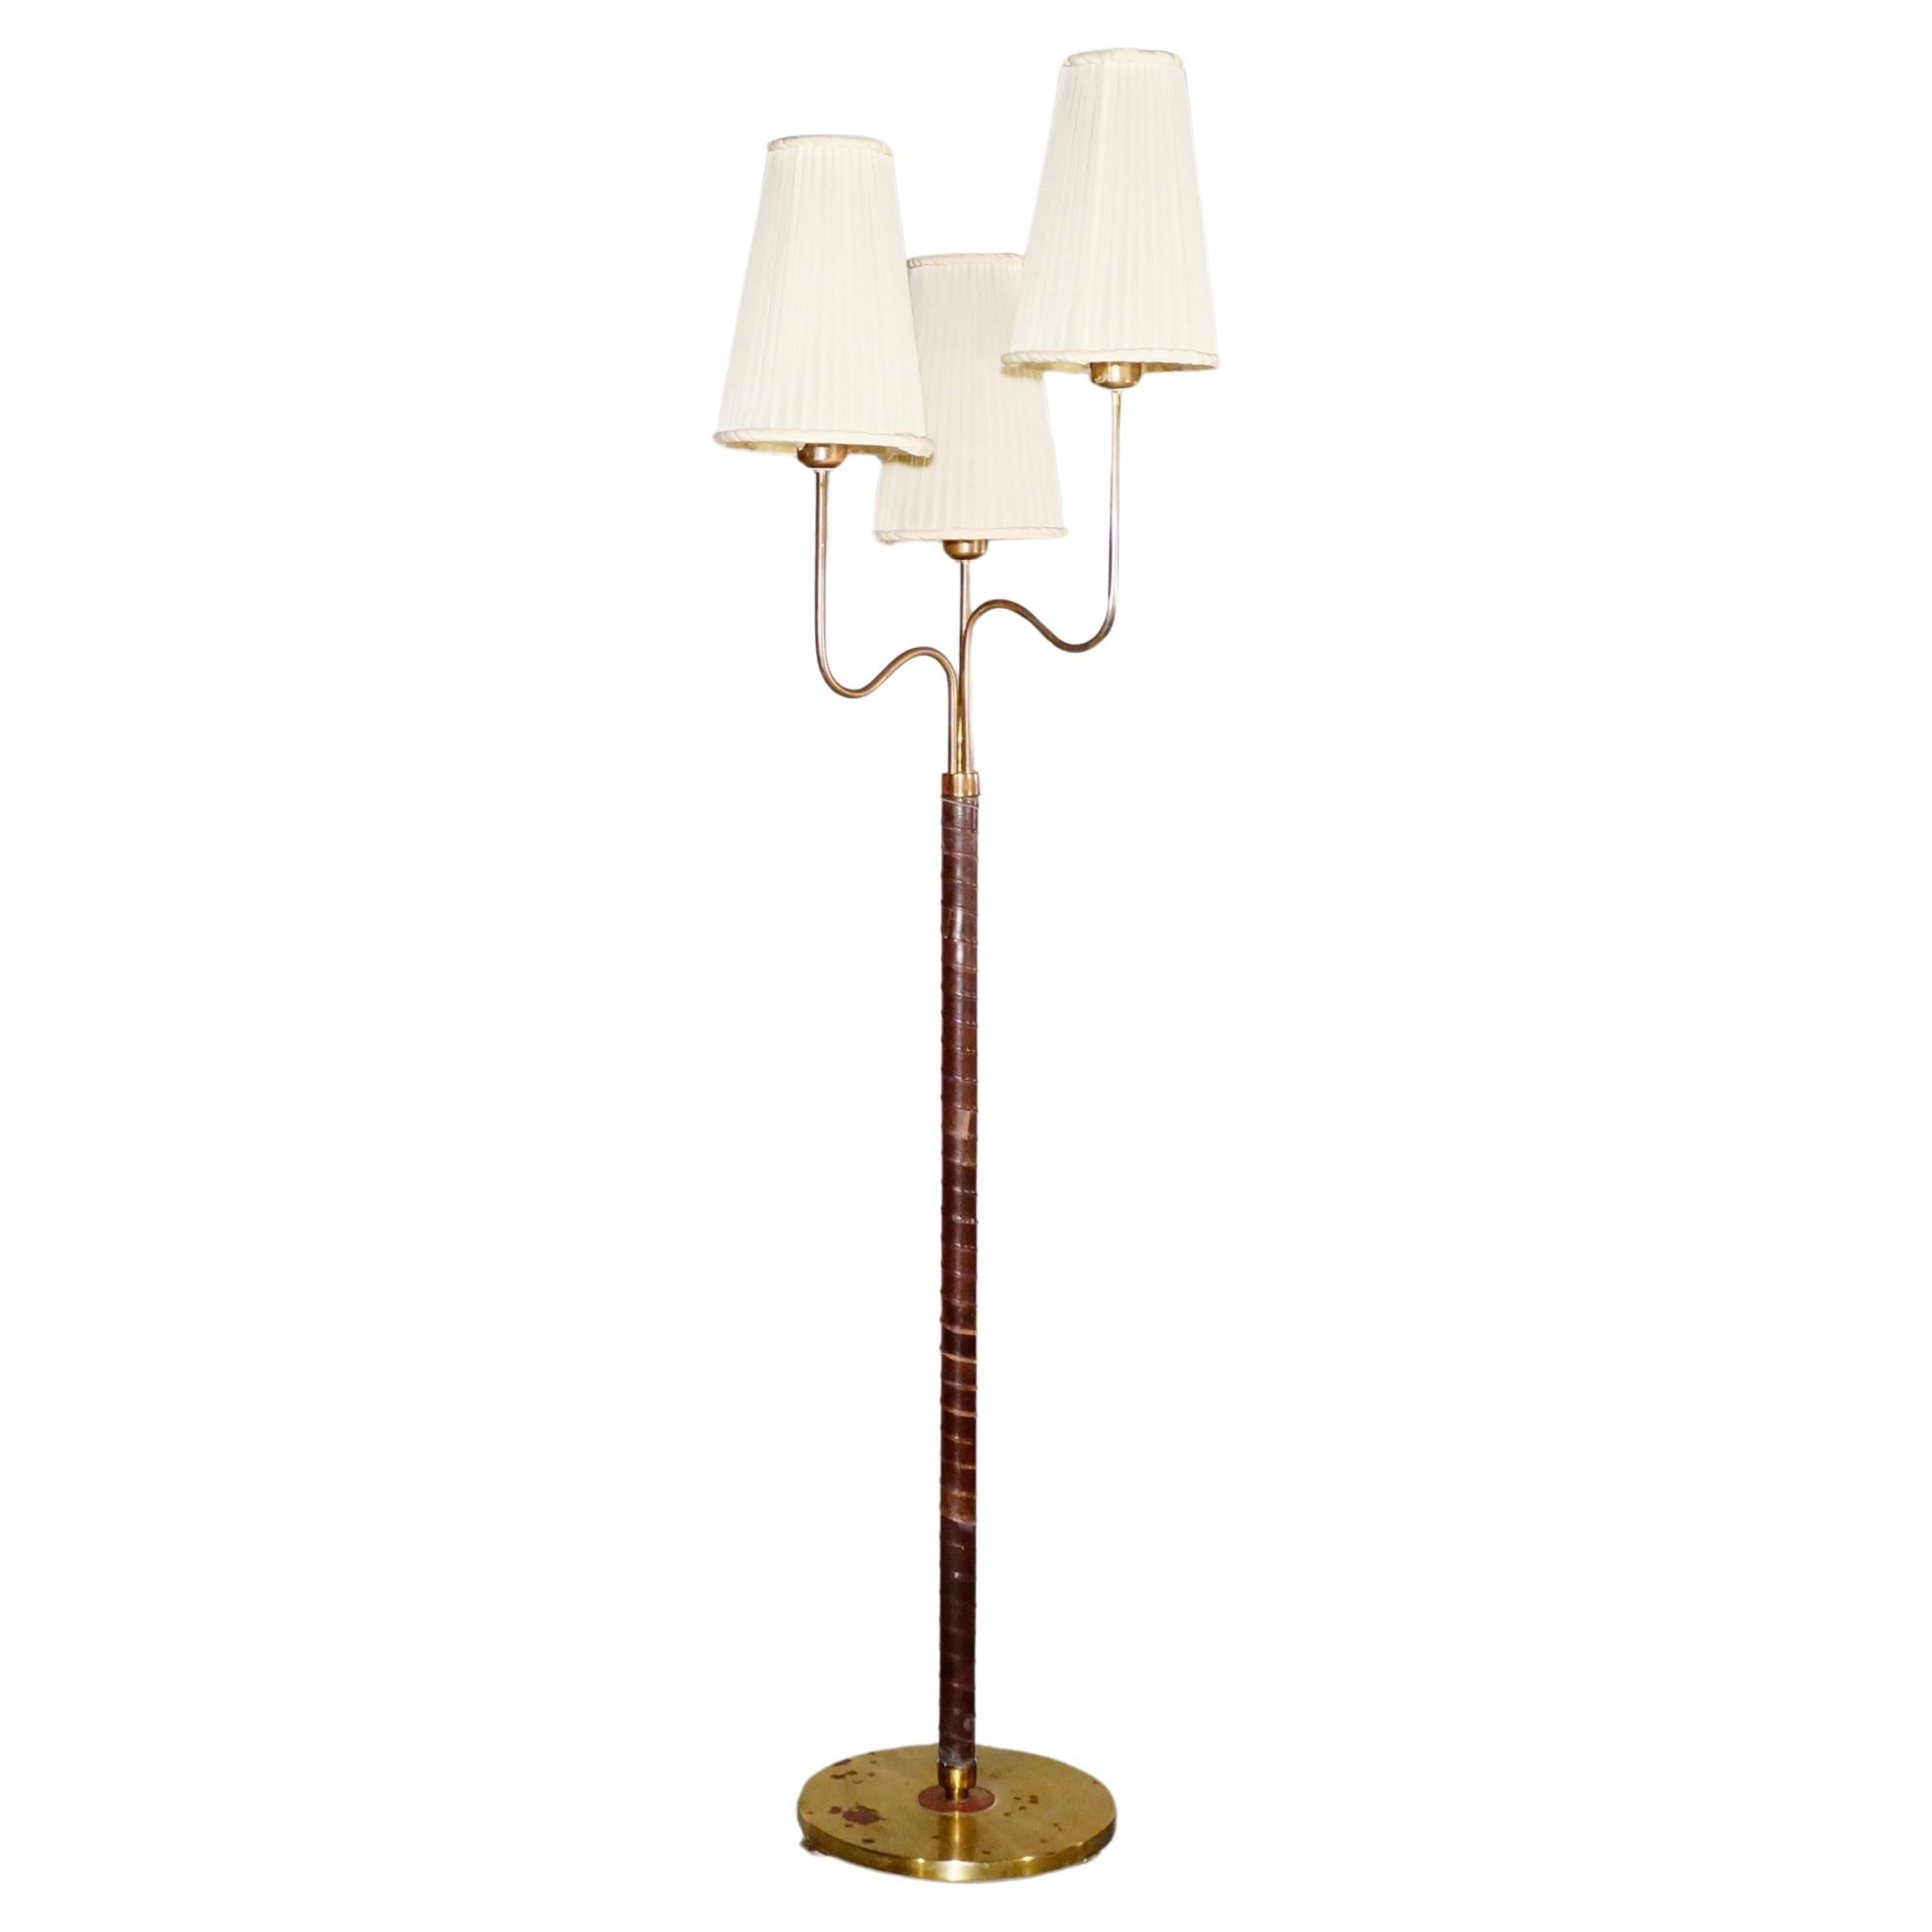 Rare Floor Lamp by Hans Bergström for ASEA from the 1946s For Sale